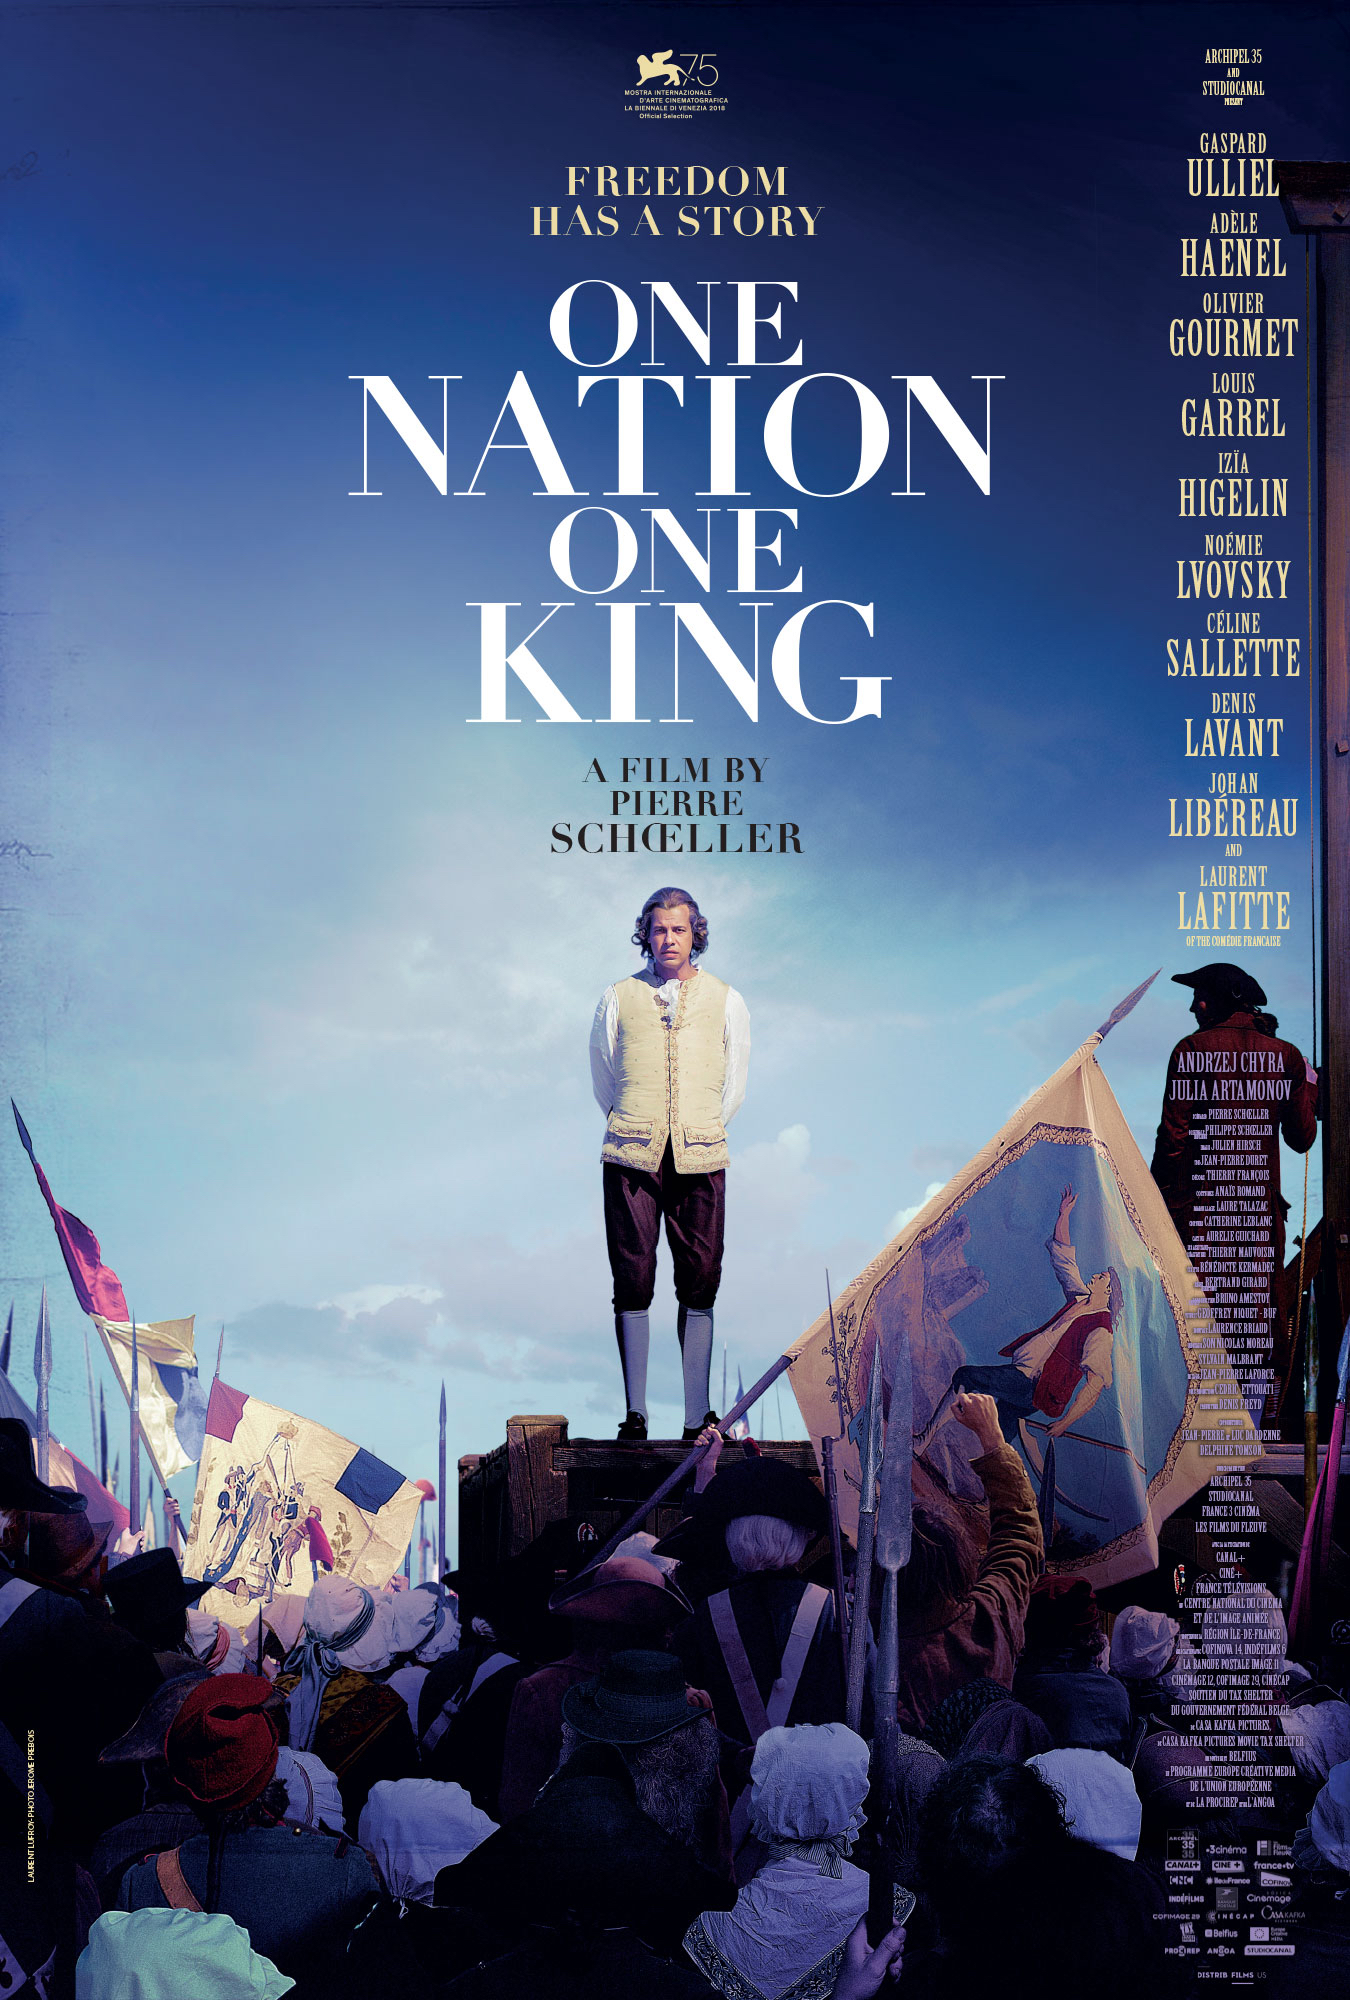 ONE NATION ONE KING